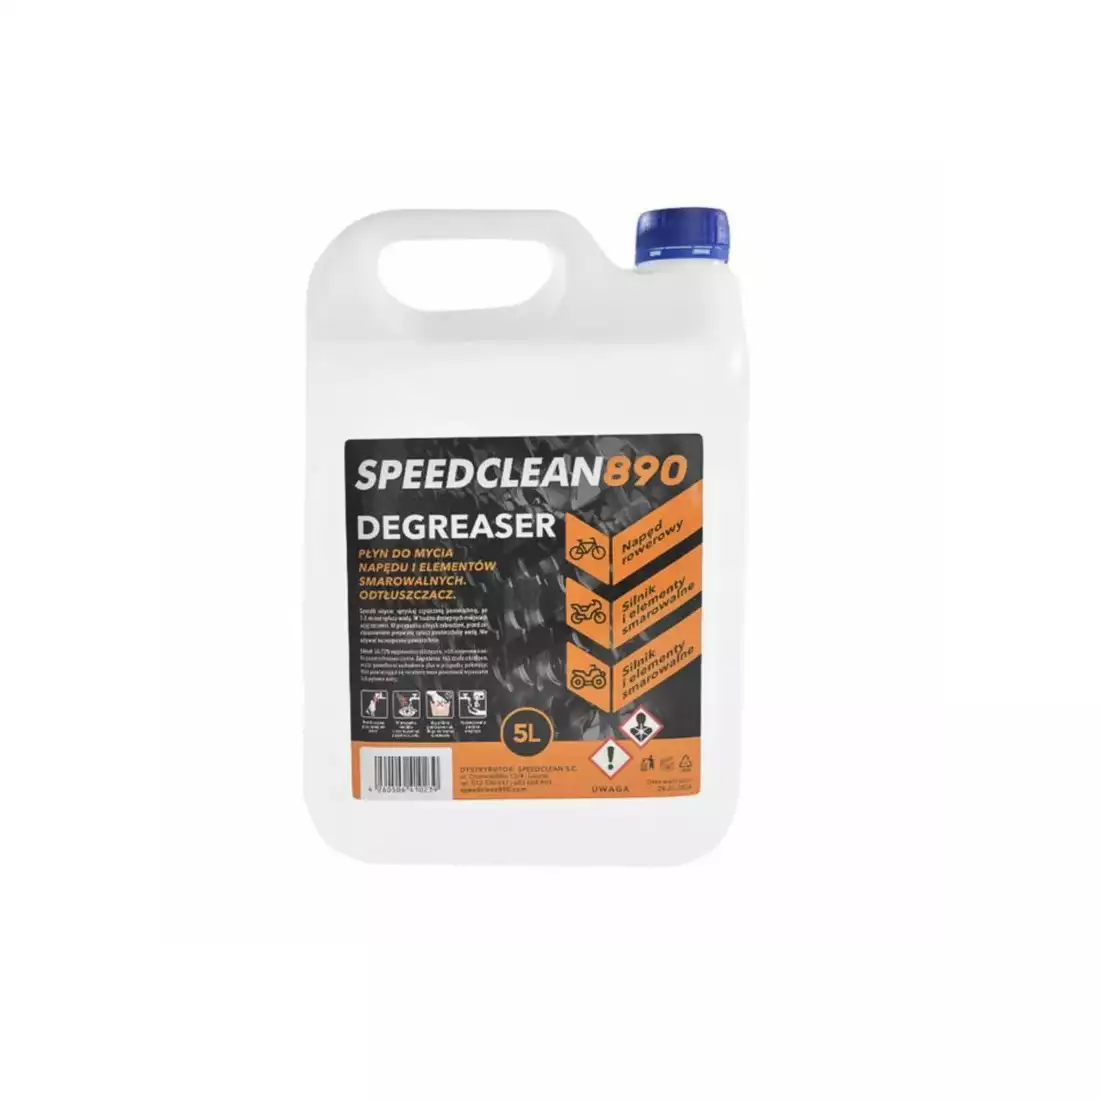 SPEEDCLEAN890 Bicycle chain degreaser 5L 